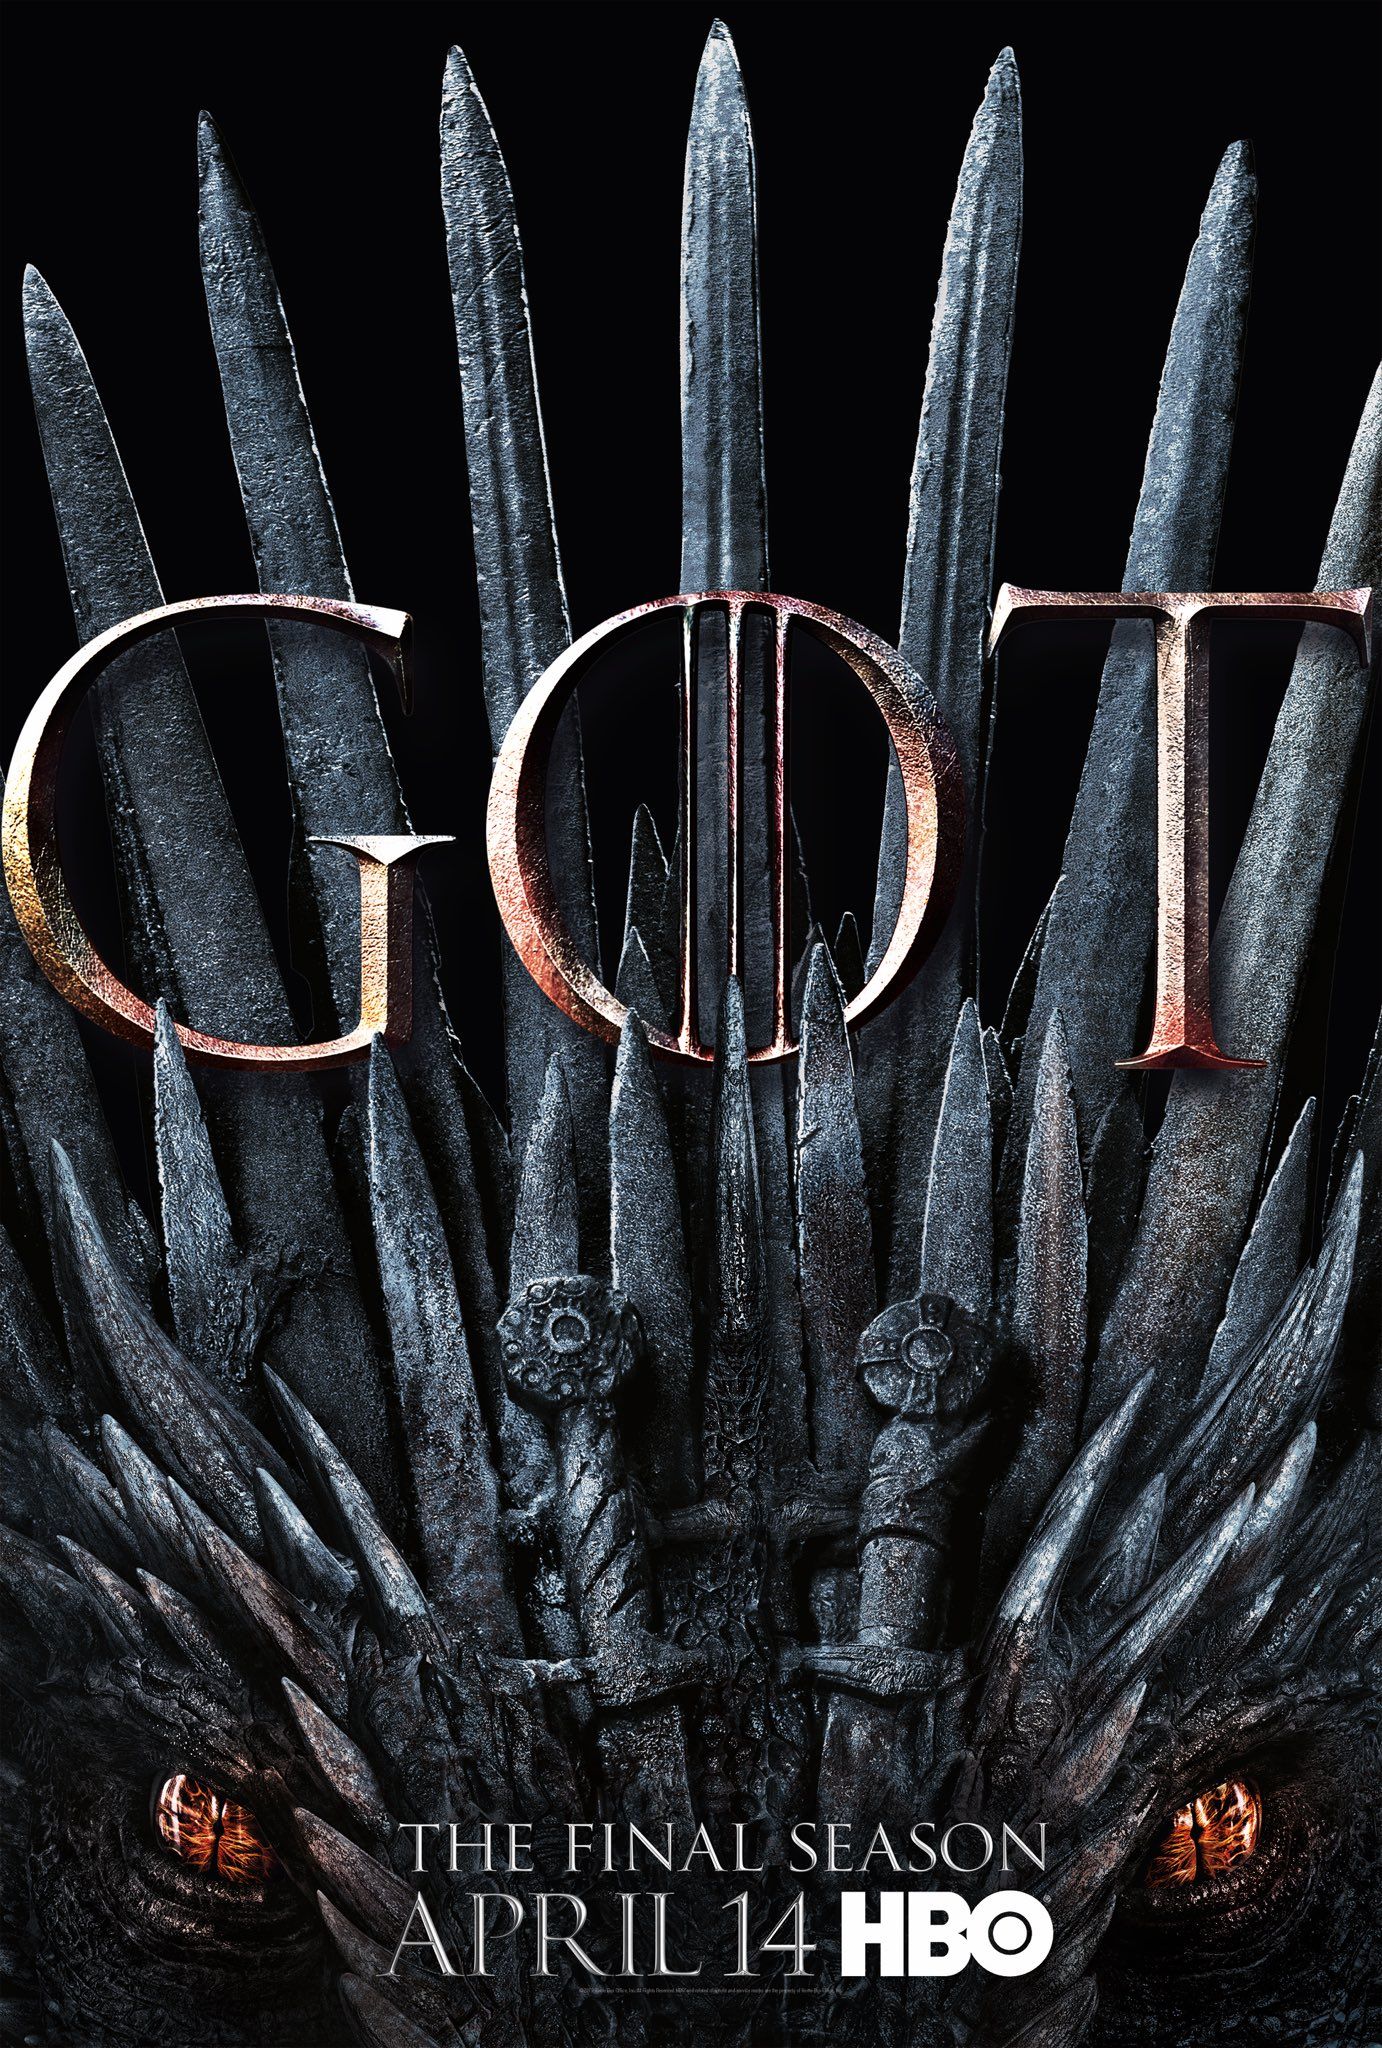 game-of-thrones-season-8-poster-features-a-dragon-vying-for-the-throne